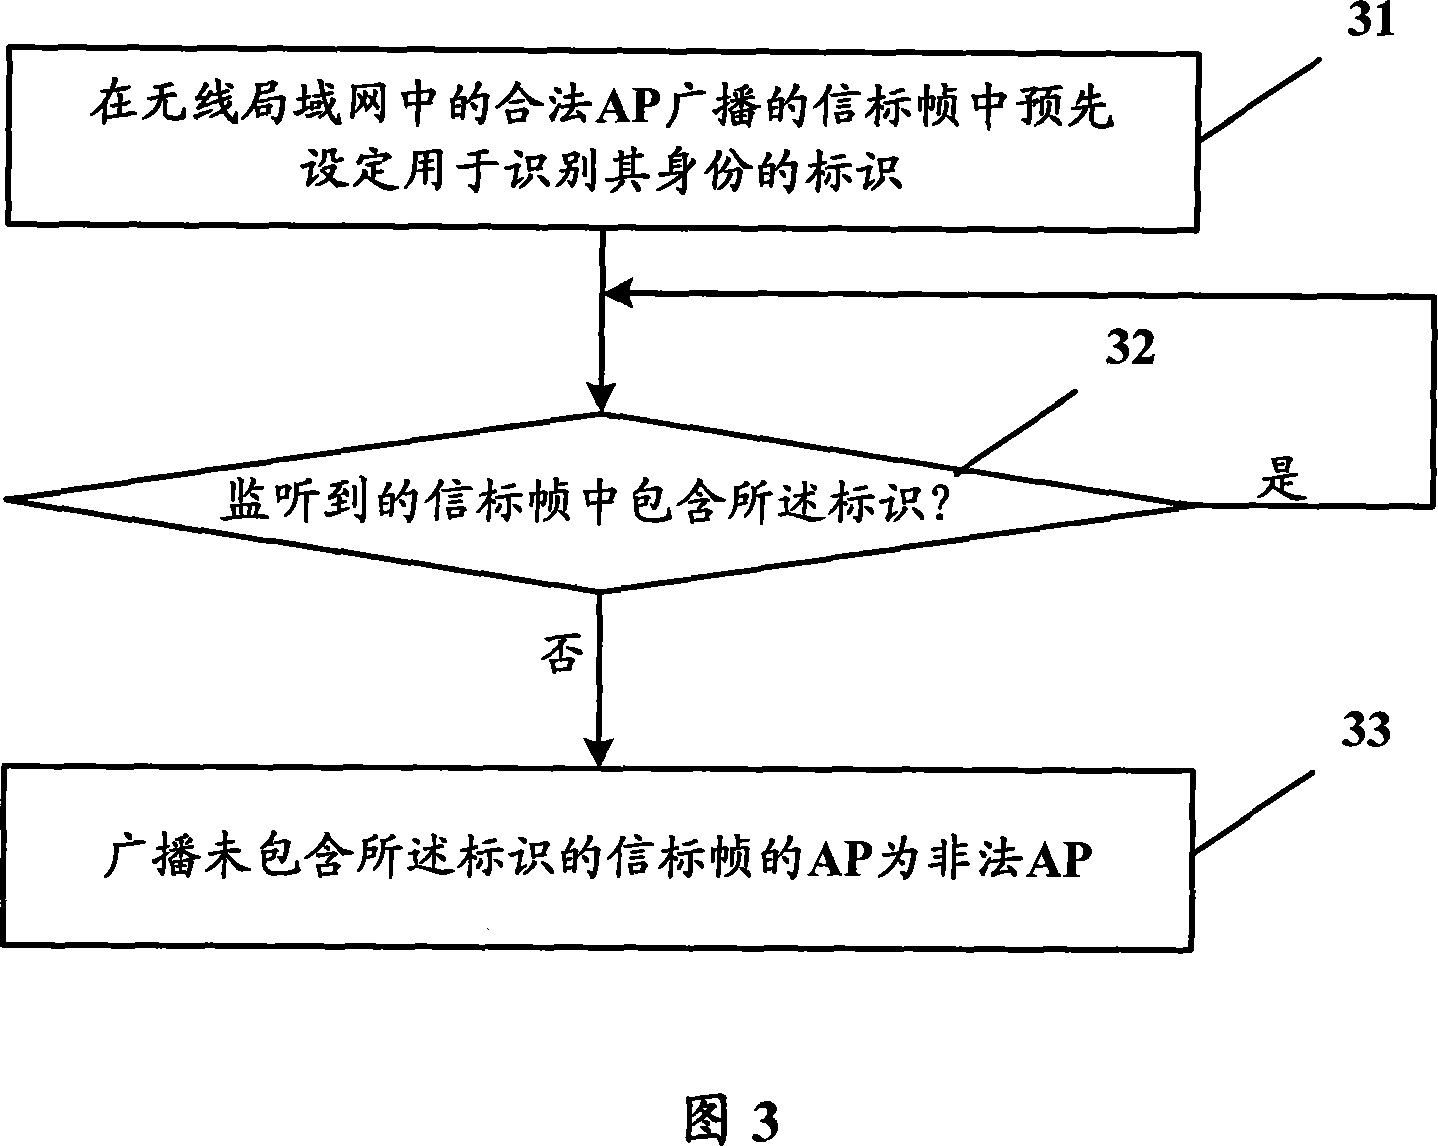 Access point, access controller and method for monitoring illegal access